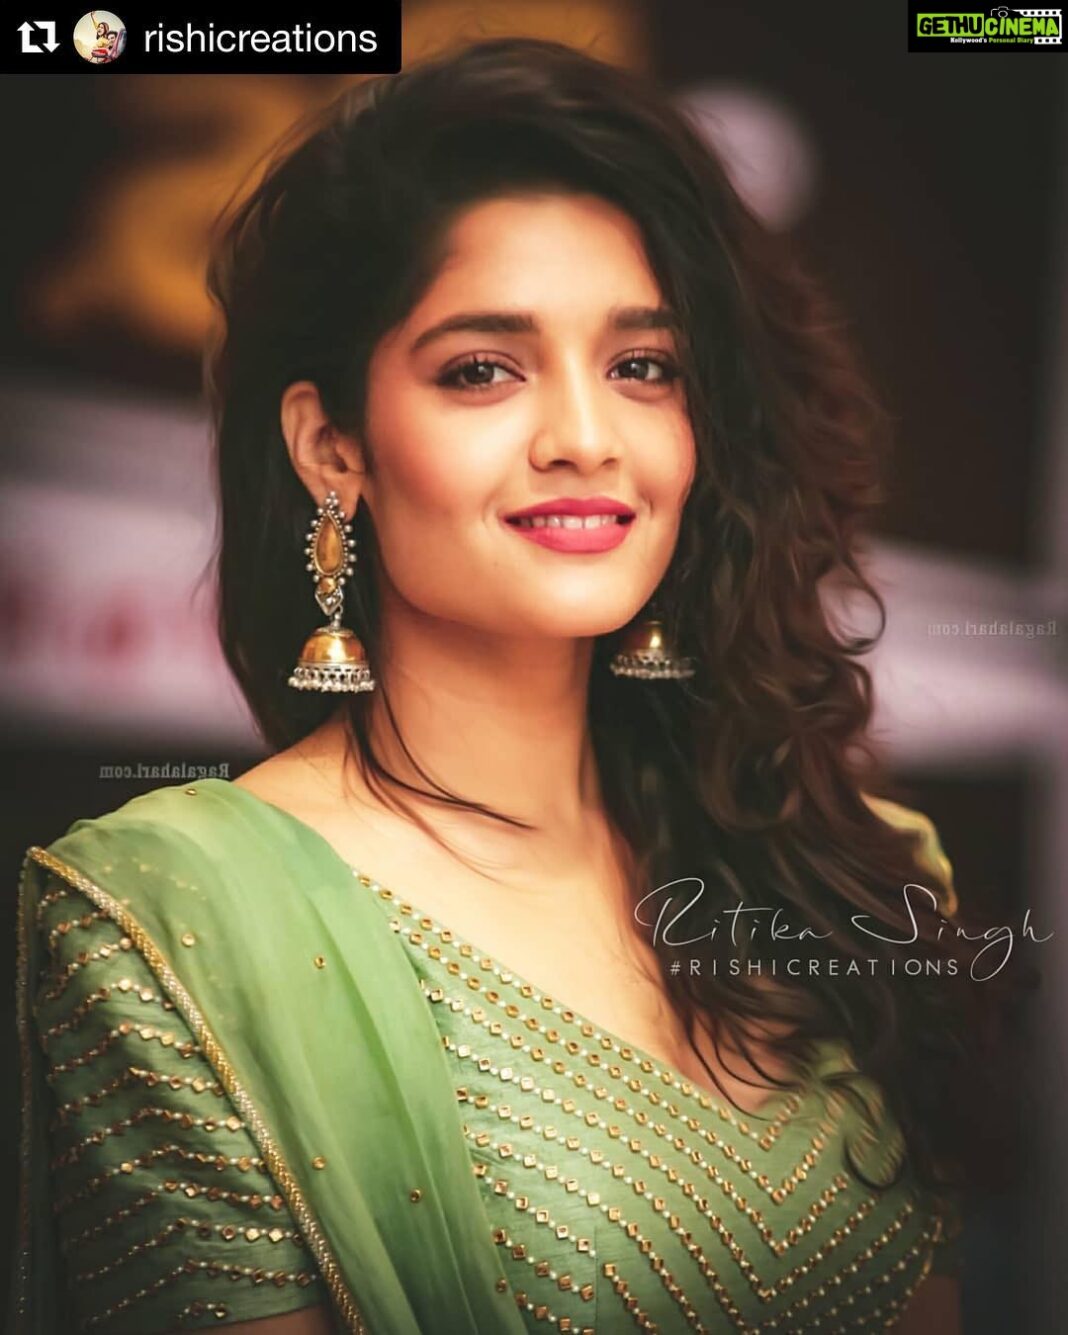 Ritika Singh Instagram - This is such a beautiful edit ❤️Thank you @rishicreations #Repost @rishicreations with @get_repost ・・・ Ritika Singh ❤️ #cute #beautiful #gorgeous #pretty #ethnicwear #awesome #ritikasingh #rishicreations @ritika_offl @instagram